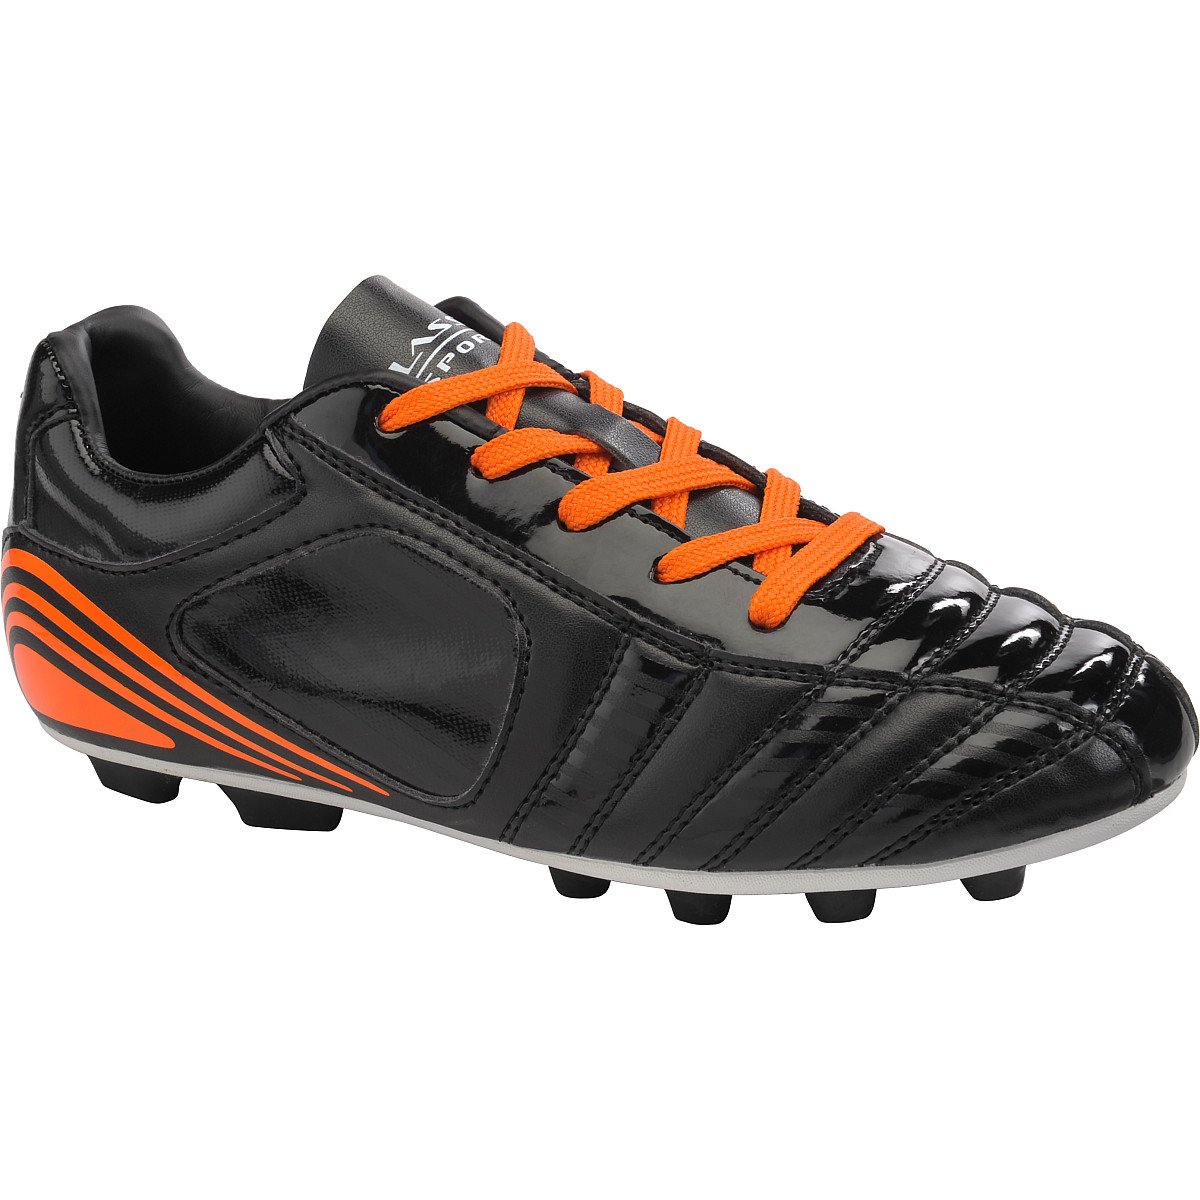  Click image to open expanded view Classic Sport Low Soccer Cleats, Black/Orange, Rubber Molded Dual Cleat Design, Padded Collar